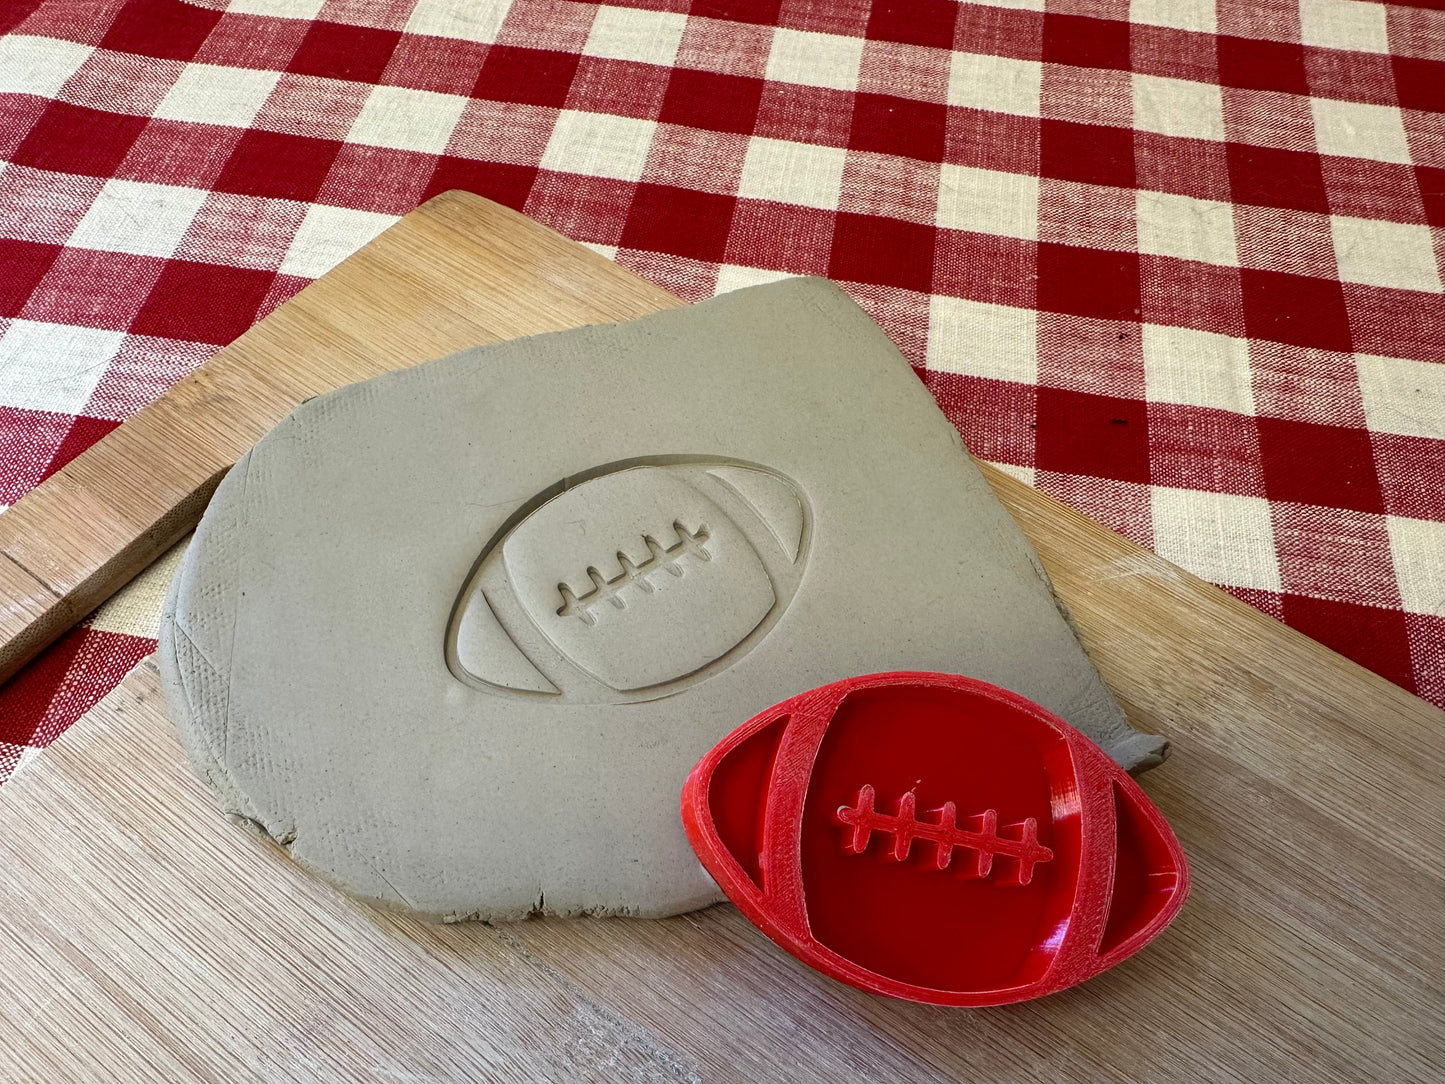 Football Pottery Stamp - Plastic 3D printed, multiple sizes available